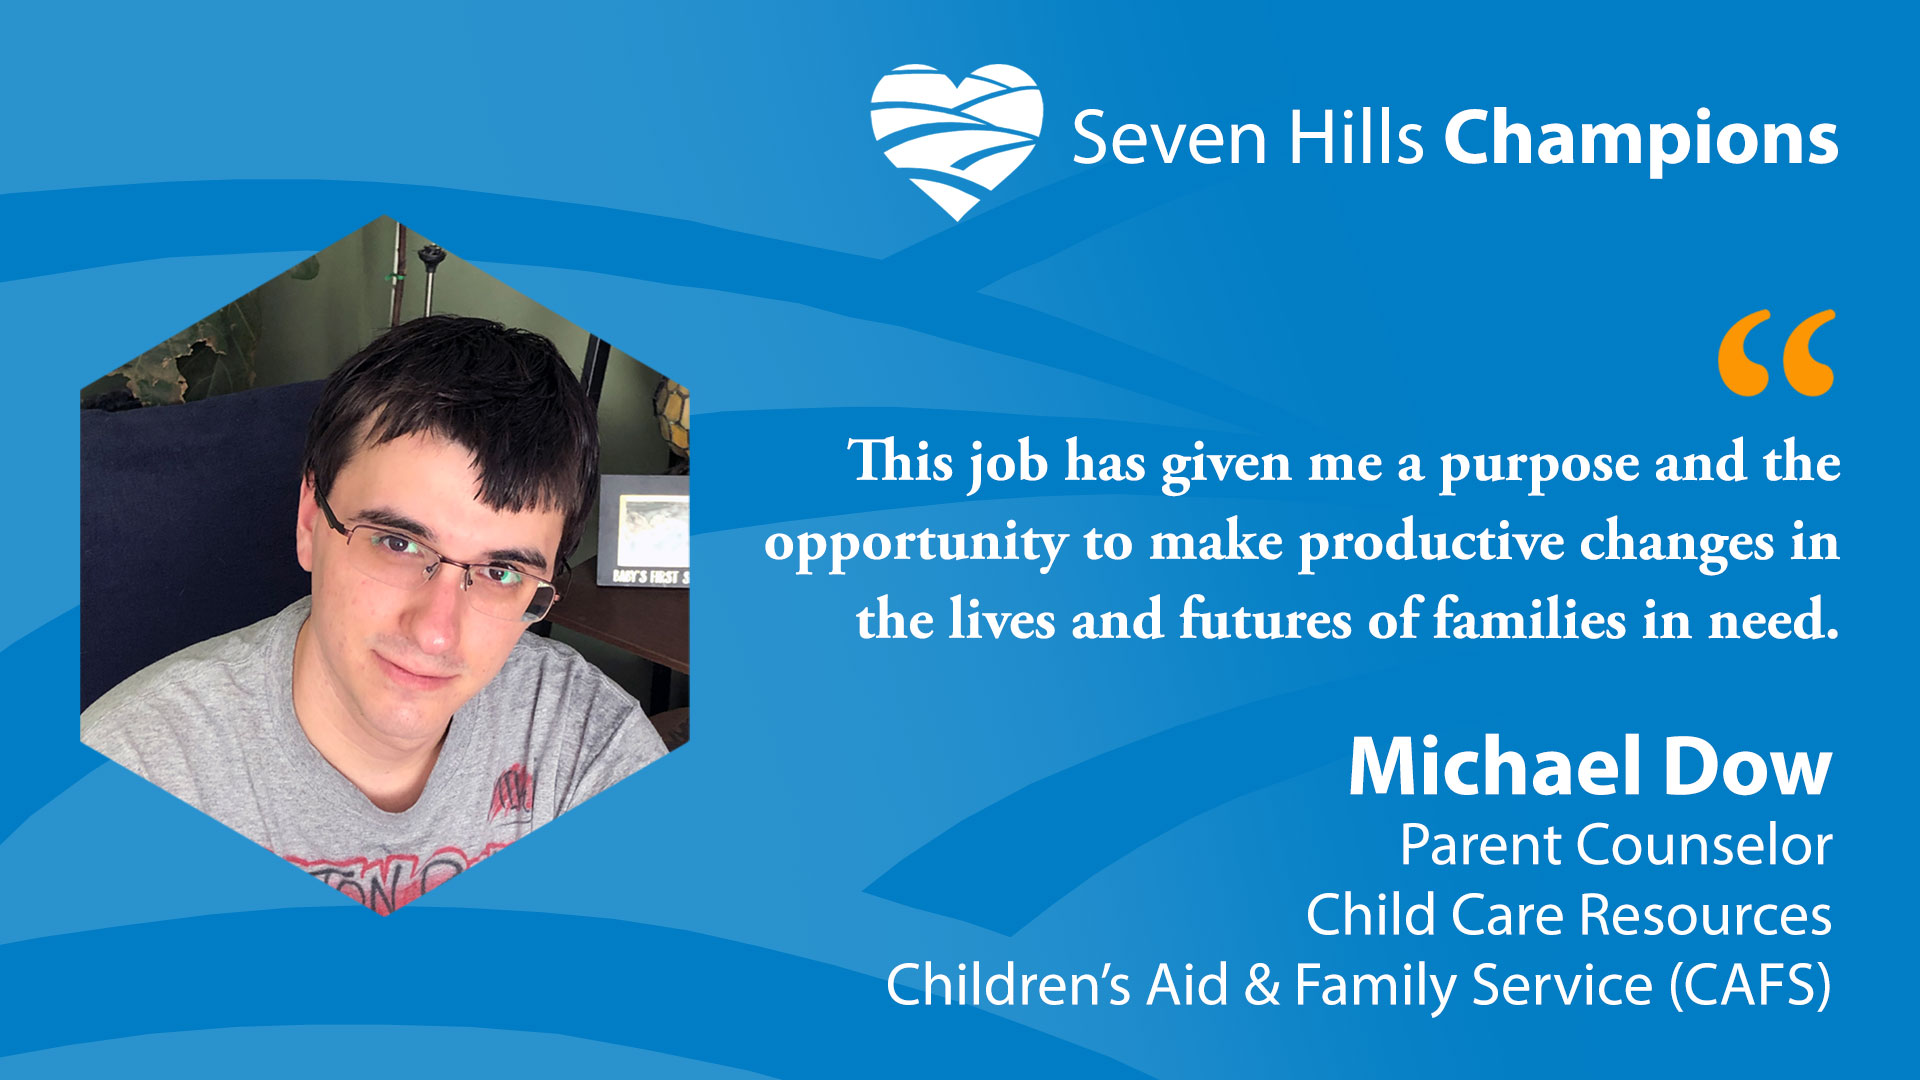 Introducing this Week's Seven Hills Champion: Michael Dow, Parent Counselor, Child Care Resources